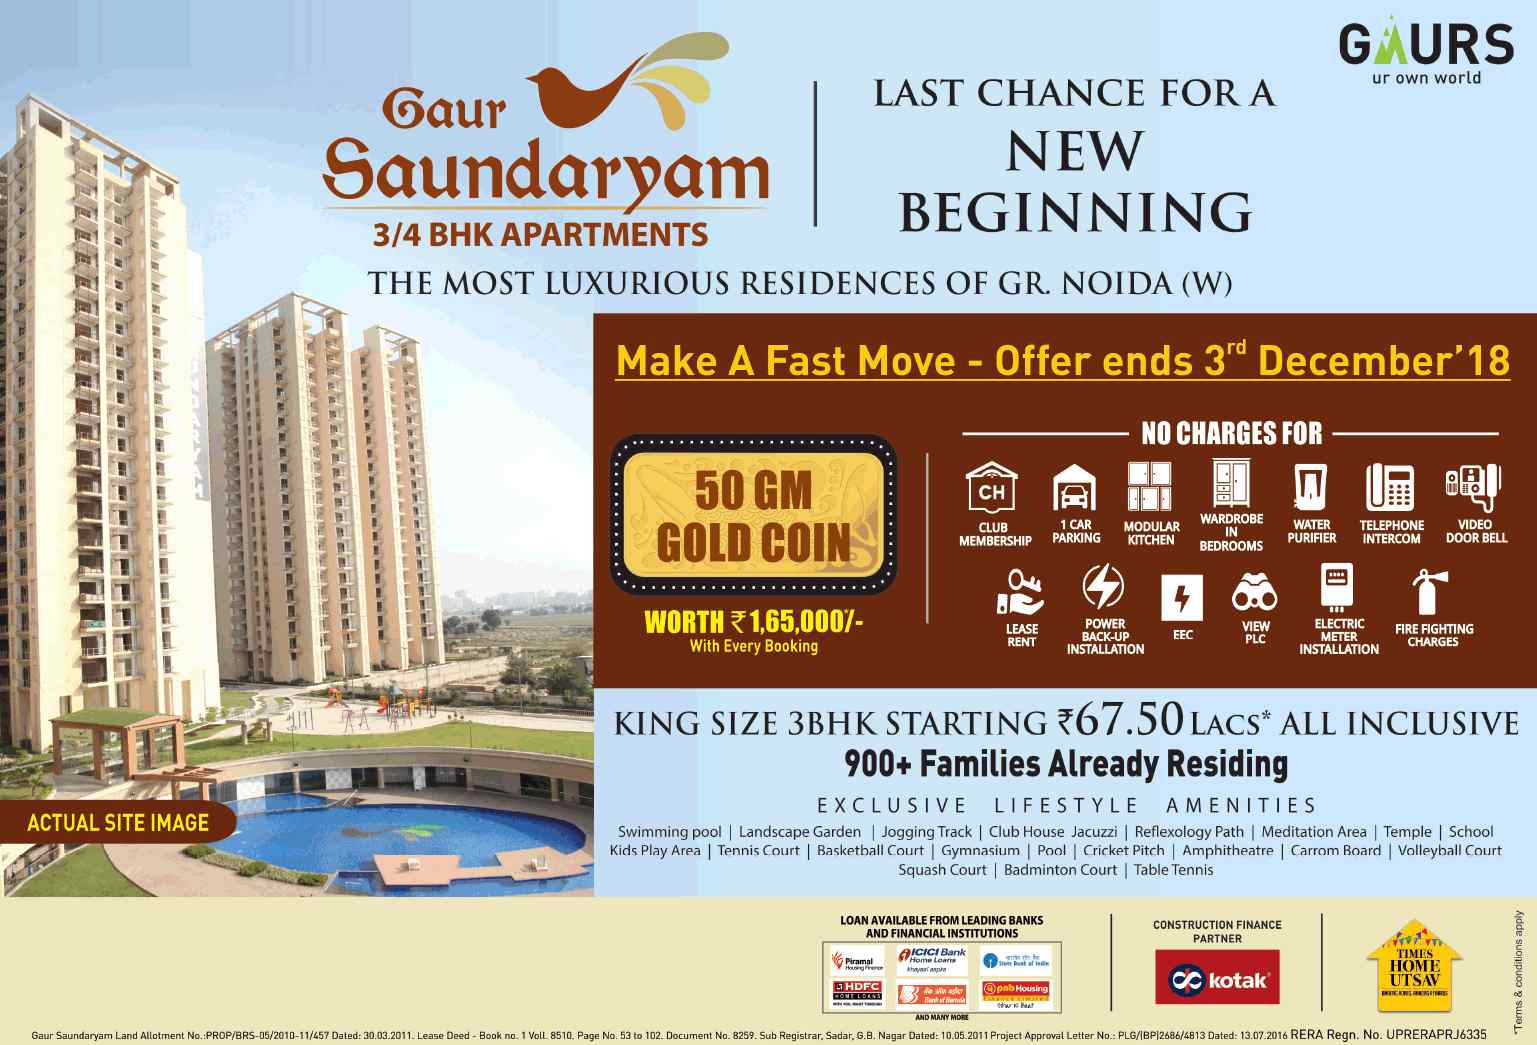 Get 50 gm gold coin with every booking at Gaur Saundaryam in Sector 1, Greater Noida